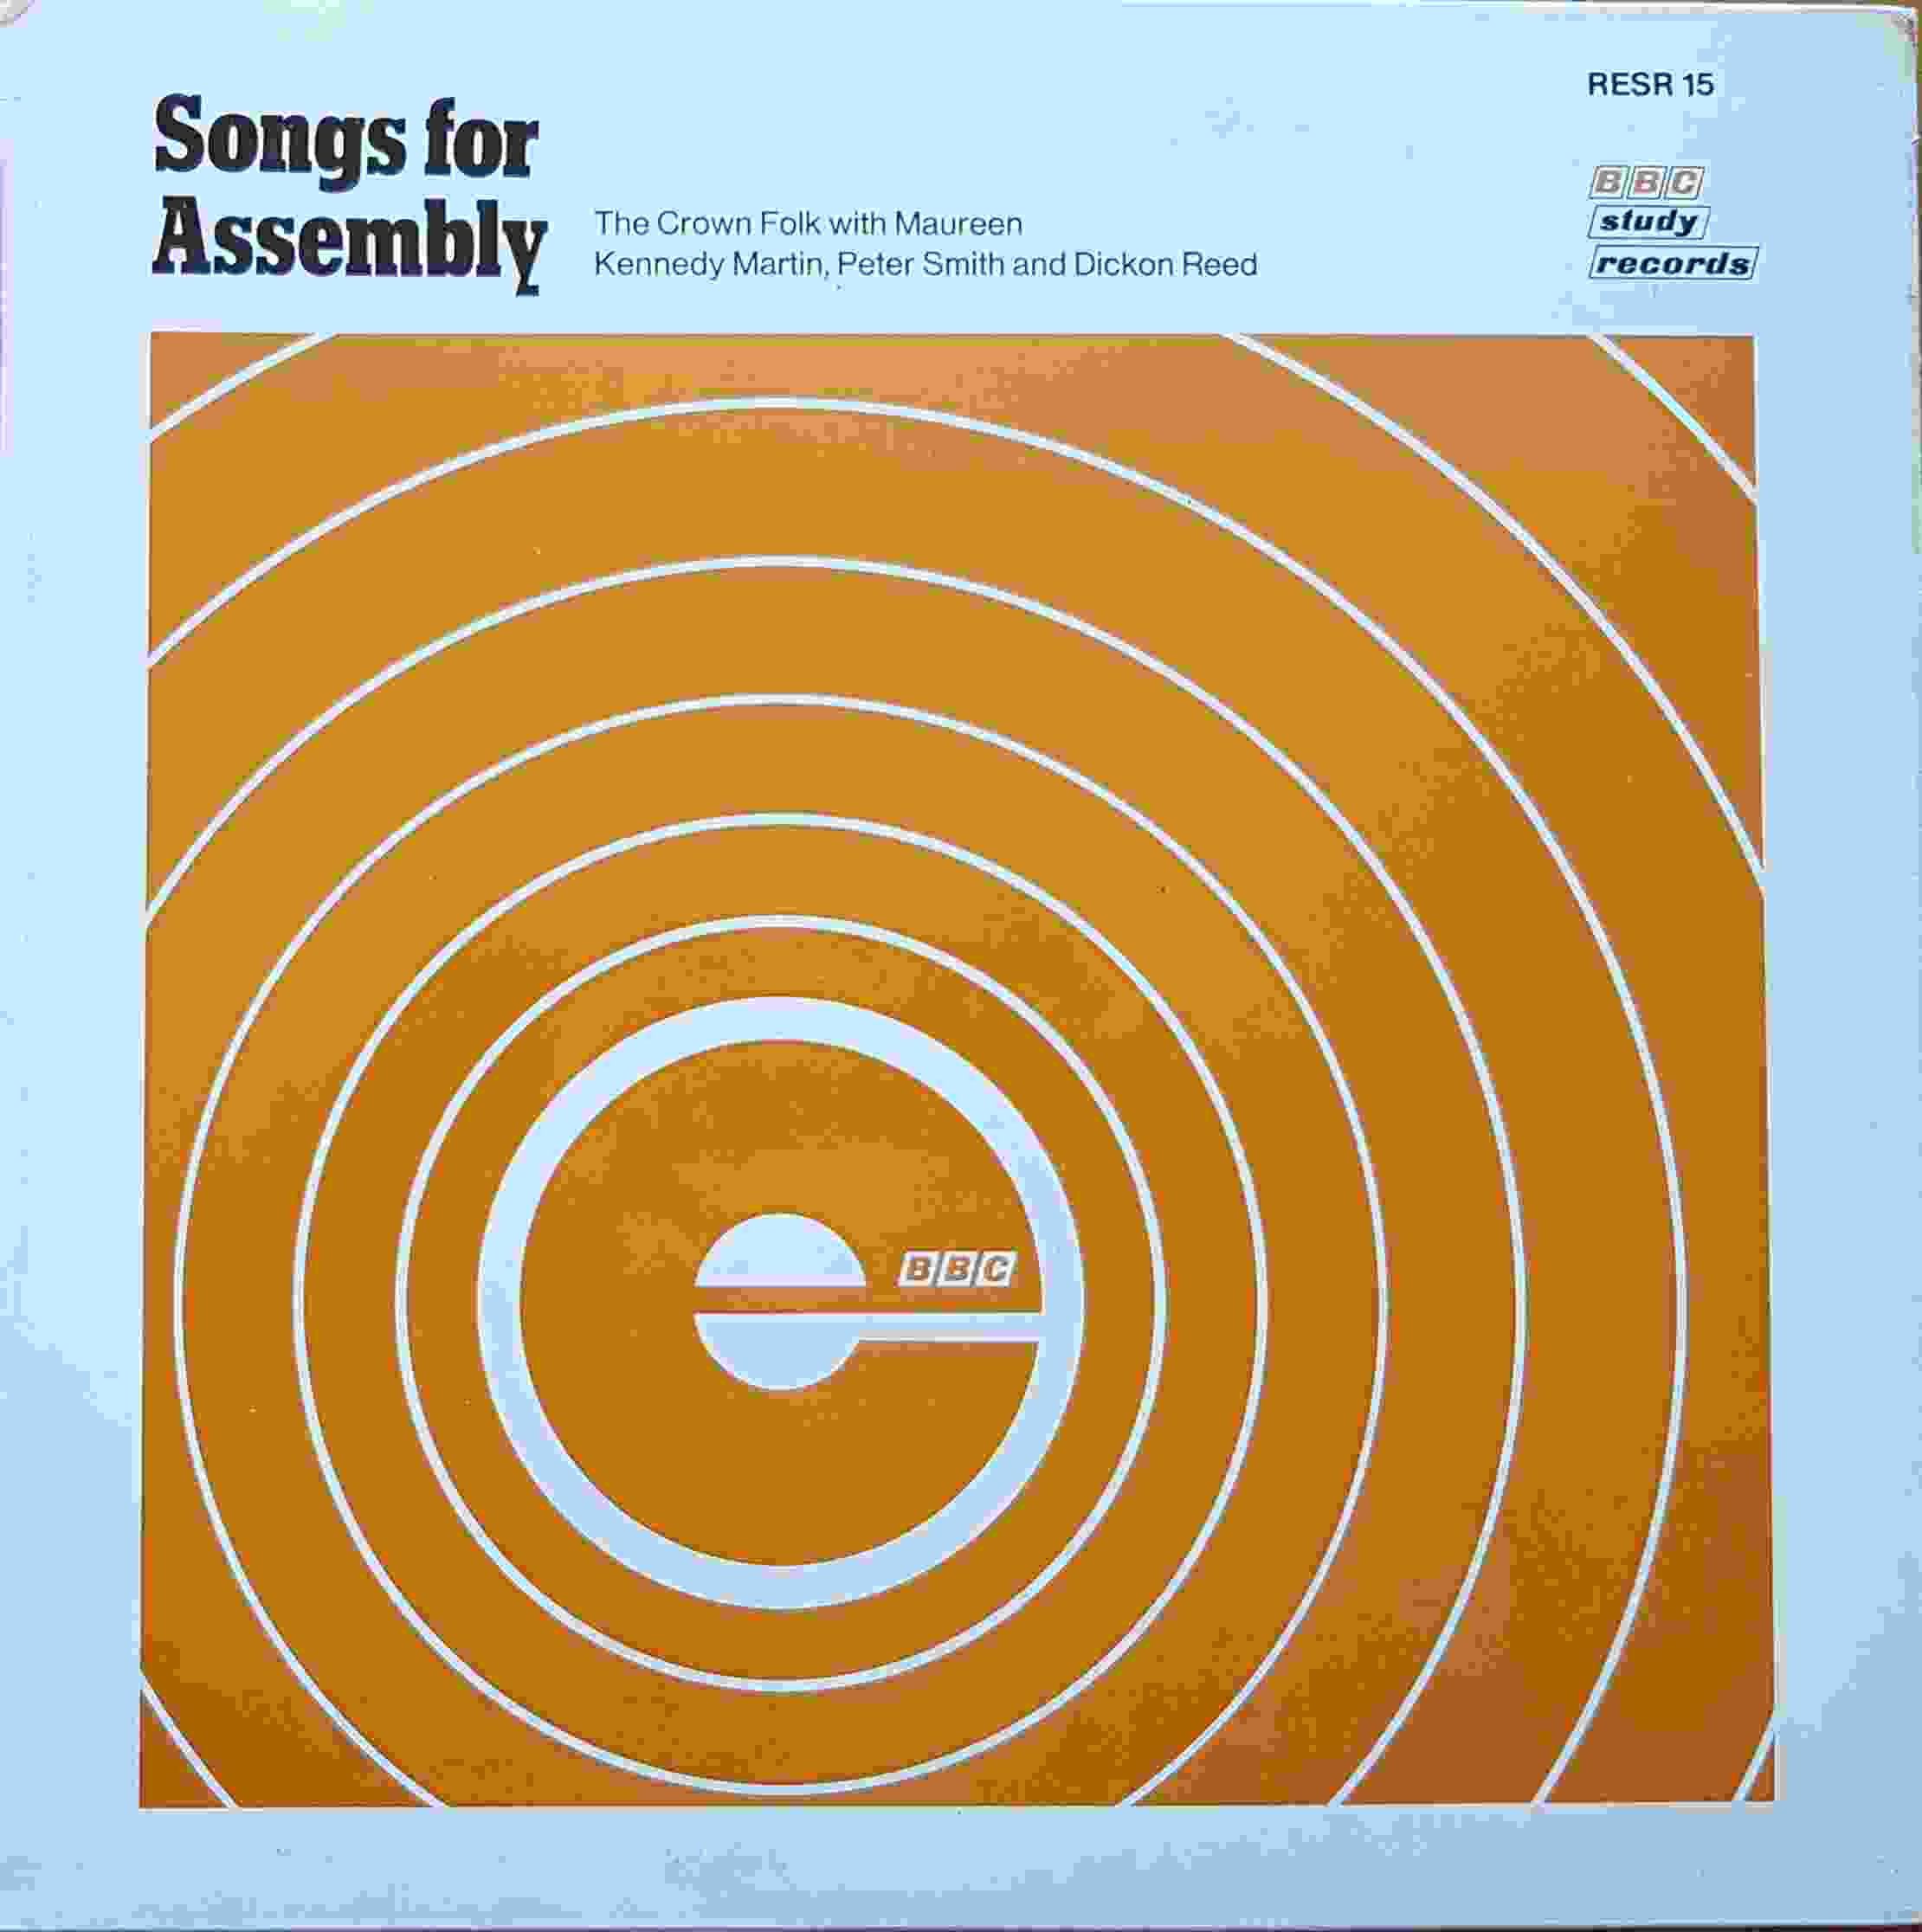 Picture of RESR 15 Songs for assembly by artist The Crown Folk / Maureen Kennedy Martin / Peter Smith / Dickon Reed from the BBC albums - Records and Tapes library